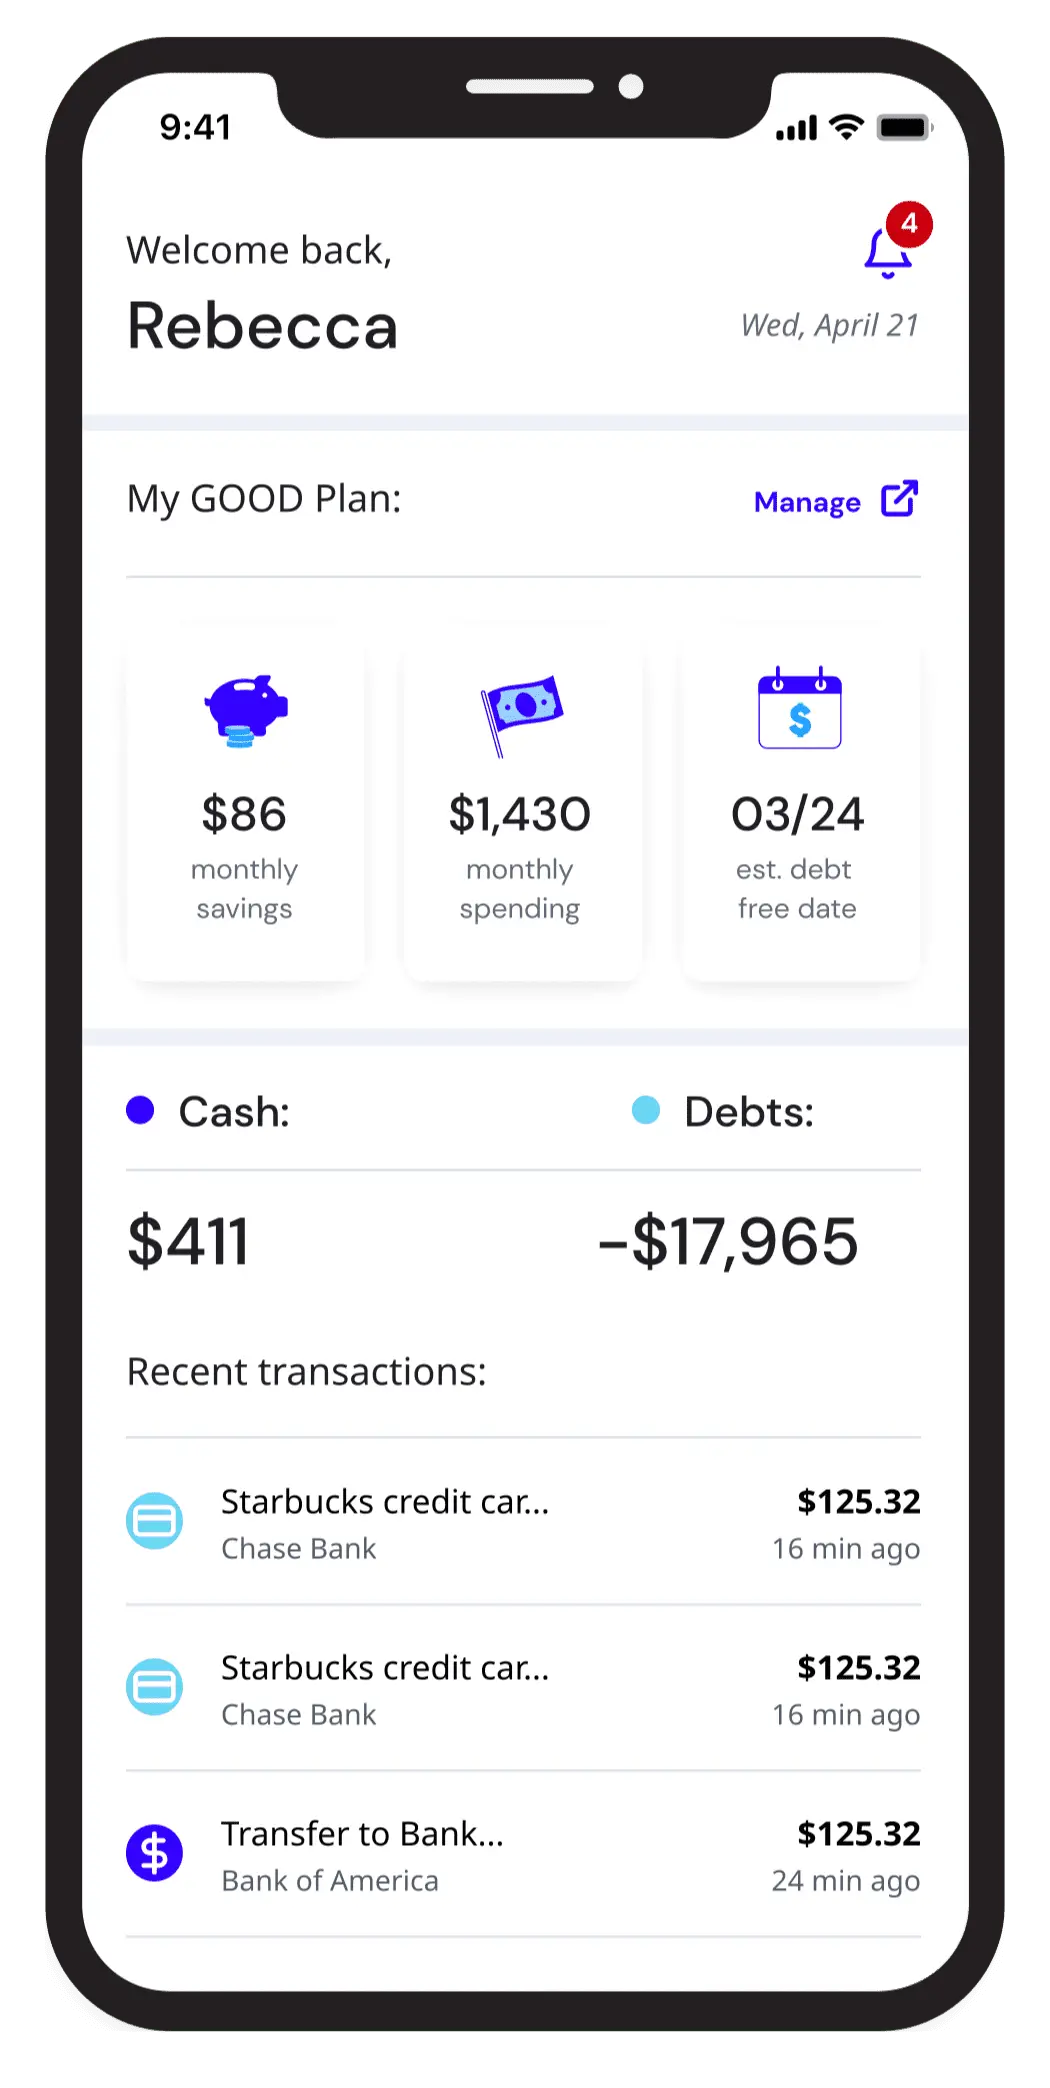 A dashboard showing a Get Out of Debt plan where a user has debts of -$17,965 and cash of $411 and their estimated monthly spending and debt free date.